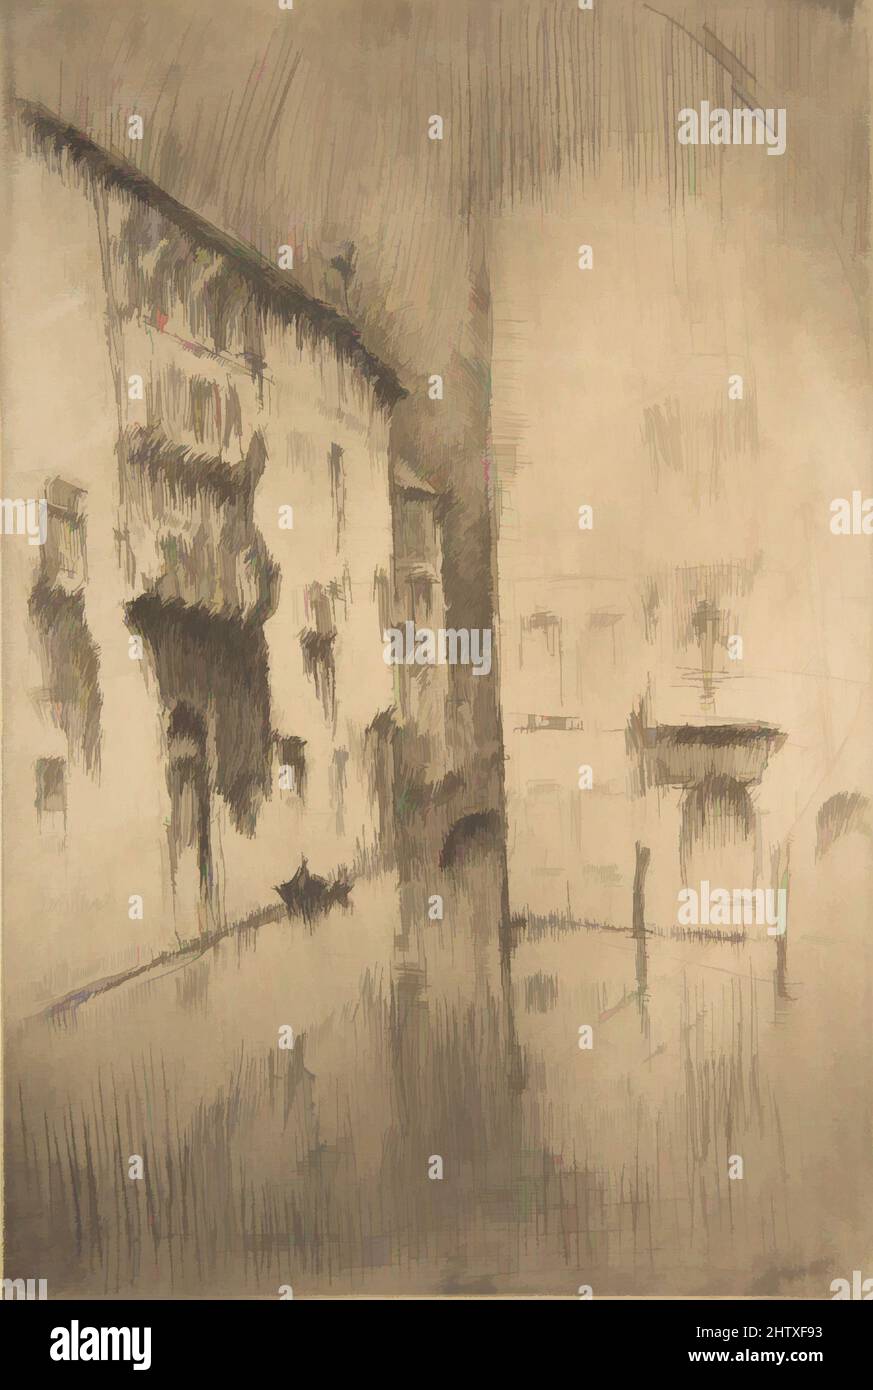 Art inspired by Nocturne: Palaces, 1879–80, Etching and drypoint; fourth state of twelve (Glasgow); printed in dark brownish-black ink on medium weight ivory laid paper, Sheet: 11 3/4 x 7 7/8 in. (29.8 x 20 cm), Prints, James McNeill Whistler (American, Lowell, Massachusetts 1834–1903, Classic works modernized by Artotop with a splash of modernity. Shapes, color and value, eye-catching visual impact on art. Emotions through freedom of artworks in a contemporary way. A timeless message pursuing a wildly creative new direction. Artists turning to the digital medium and creating the Artotop NFT Stock Photo